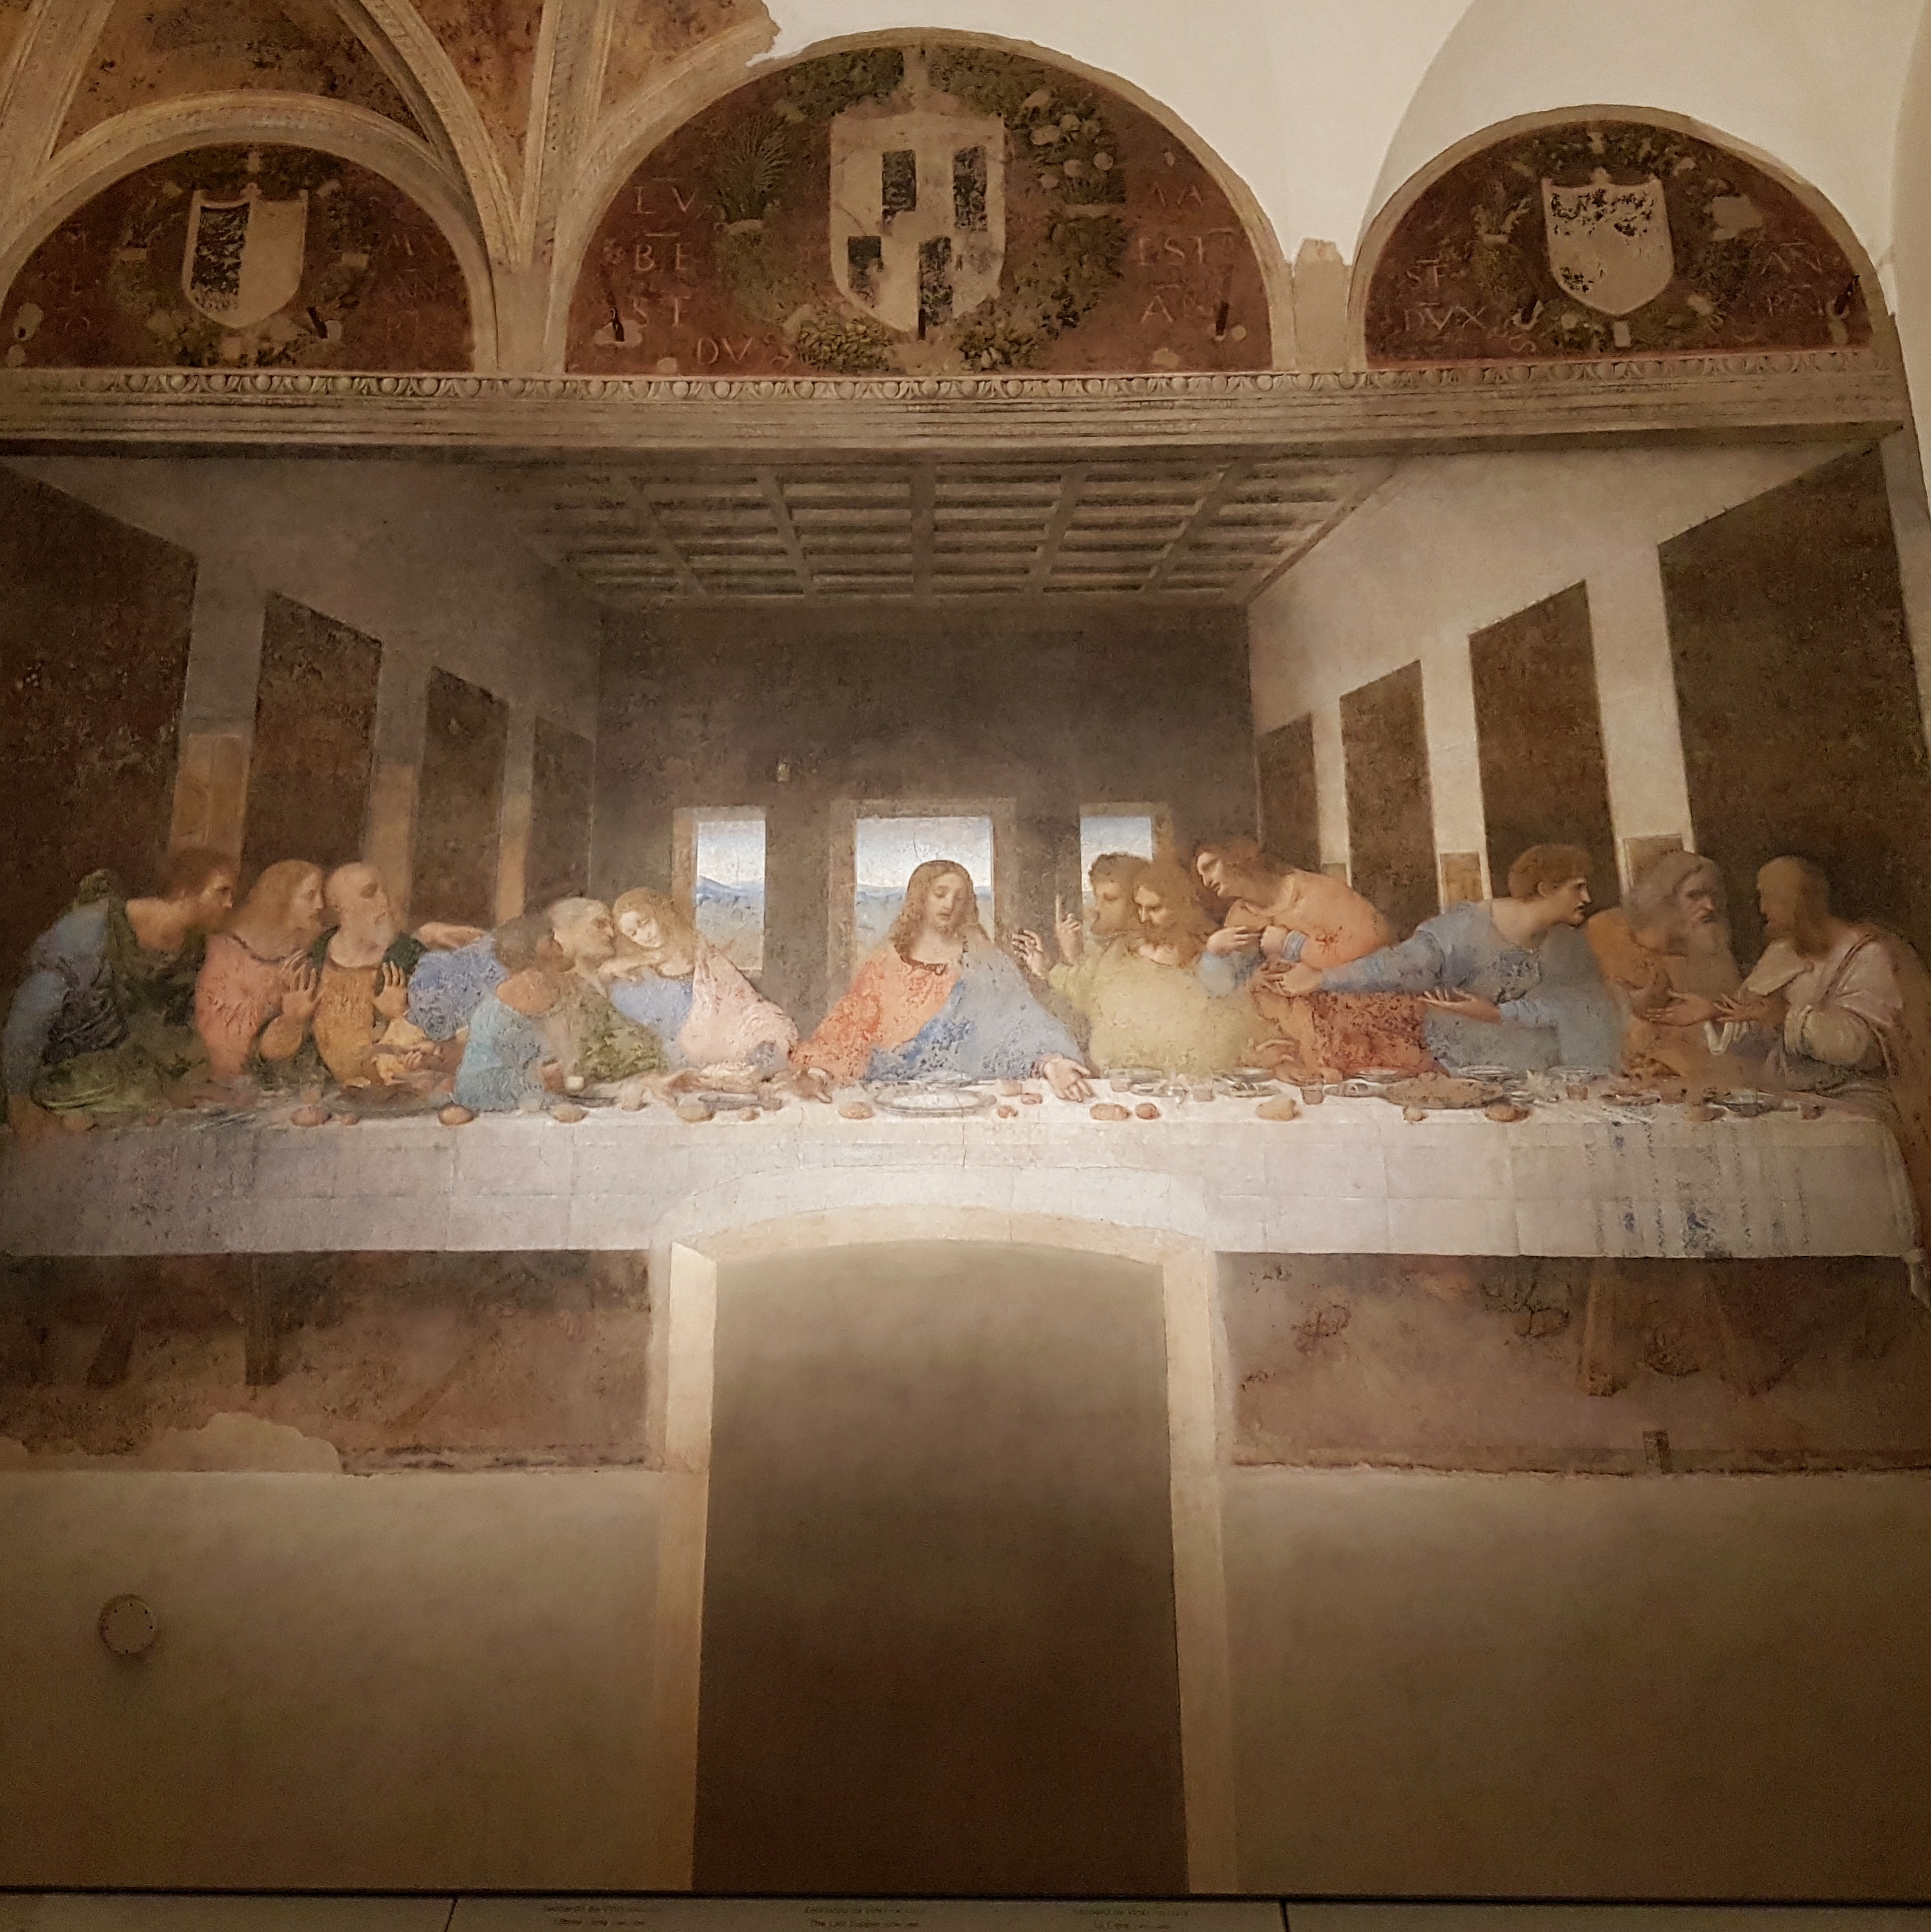 The last Supper painting